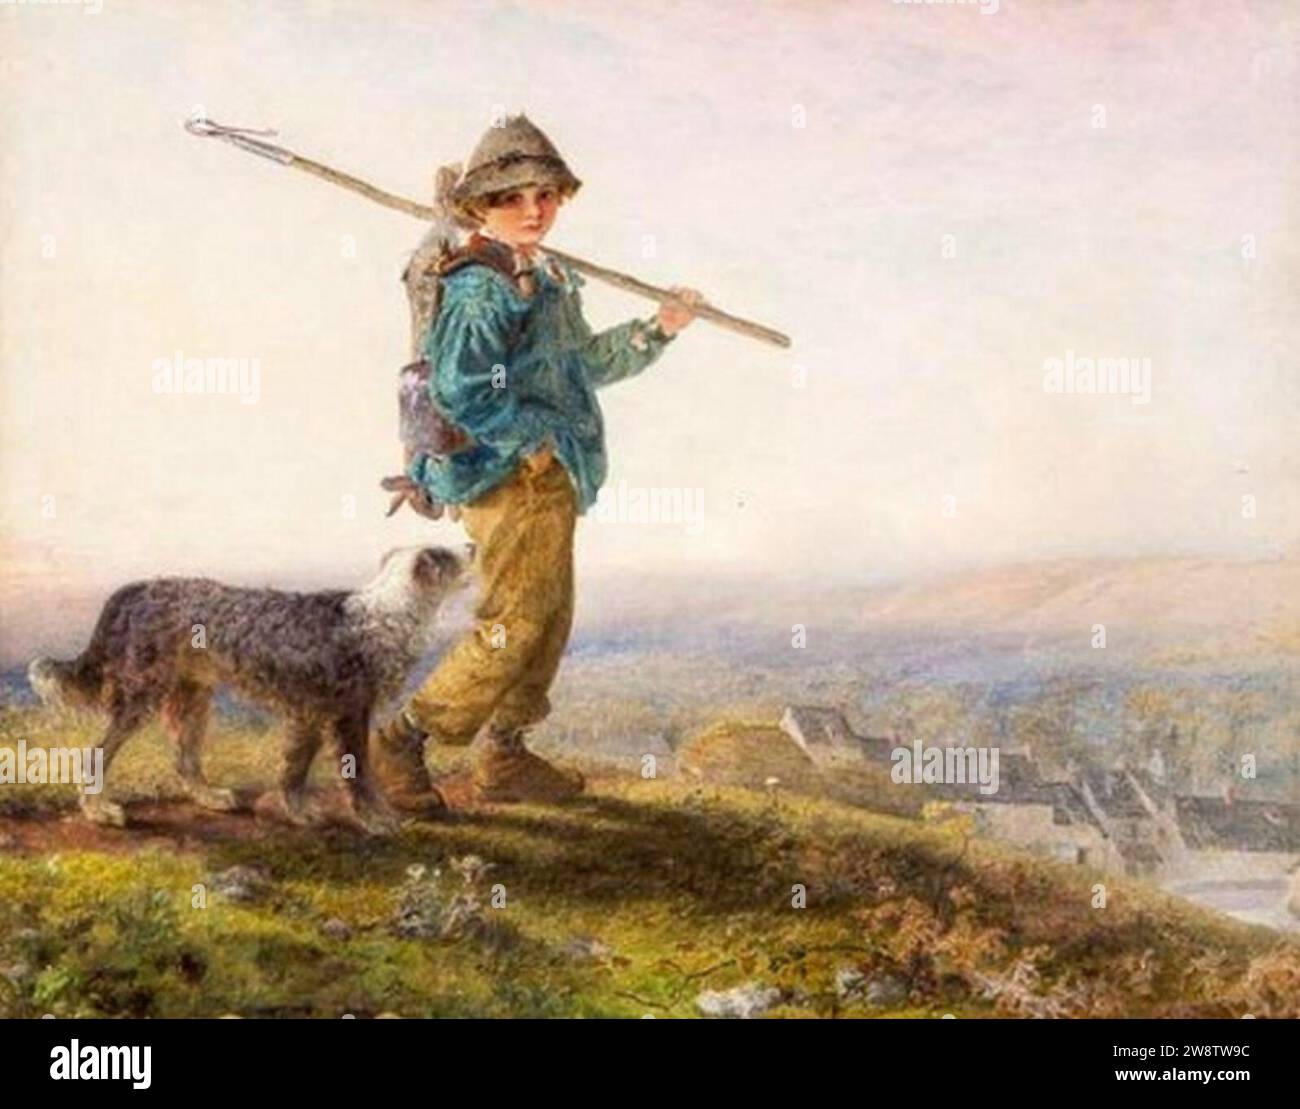 Jeune garde-chasse par Alfred Downing Fripp. Banque D'Images